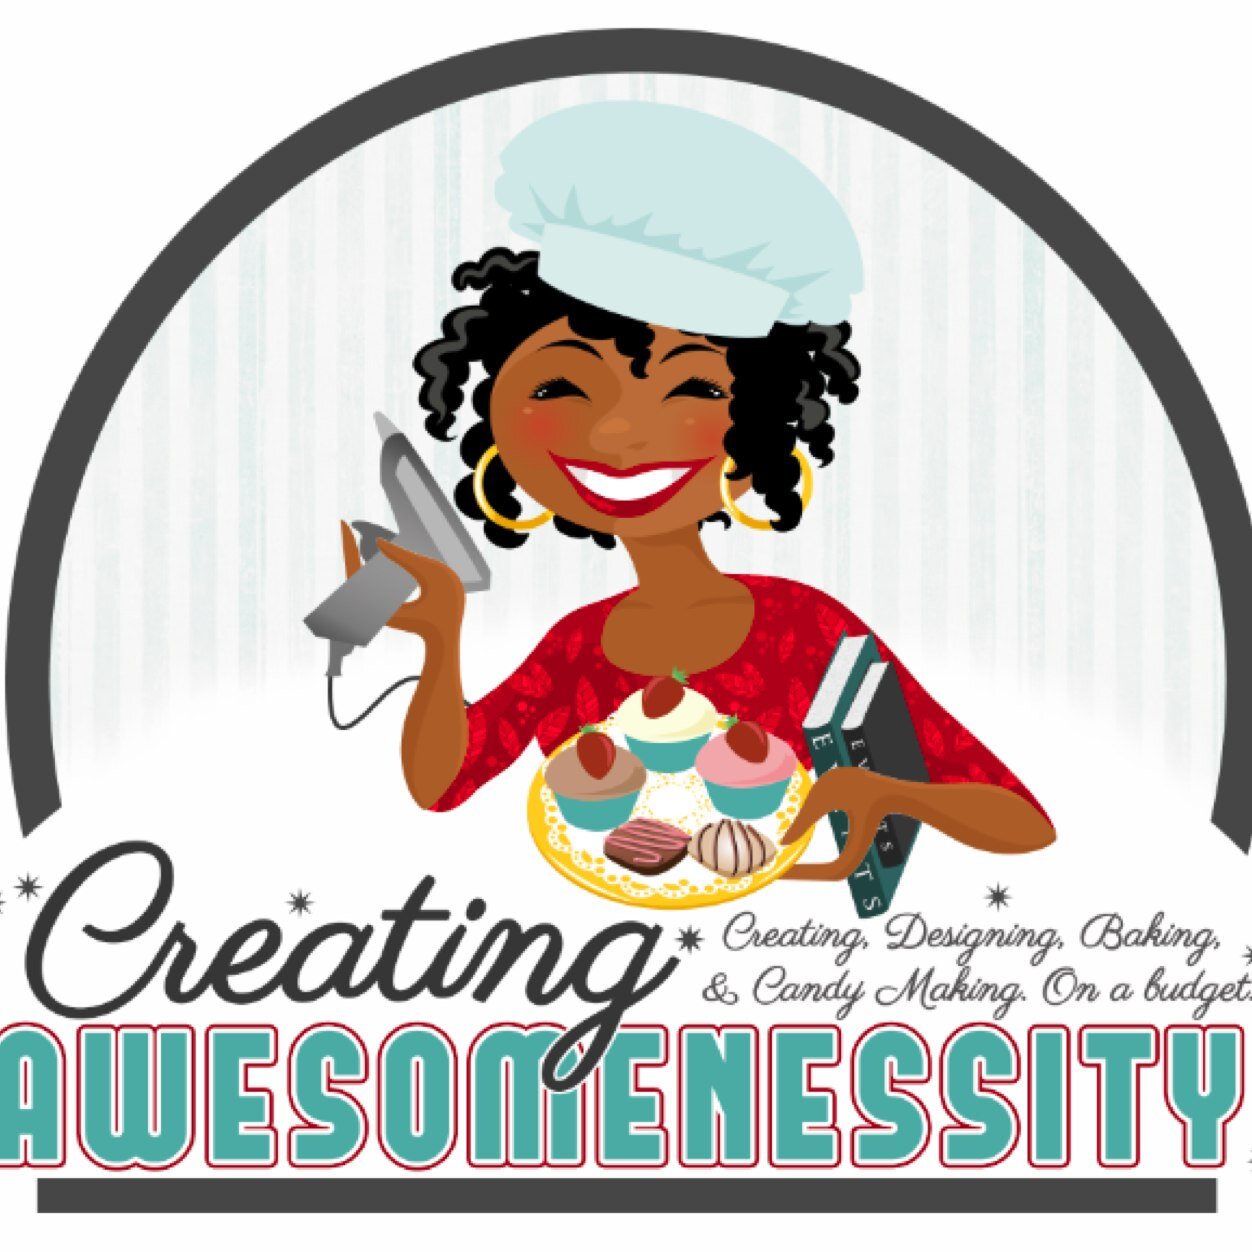 #Christian Frau | #EventPlanner | #Blogger | #Memphis #CookieArtist | Creating, designing, baking, and candy making. On a budget. | #DIY is how I do!